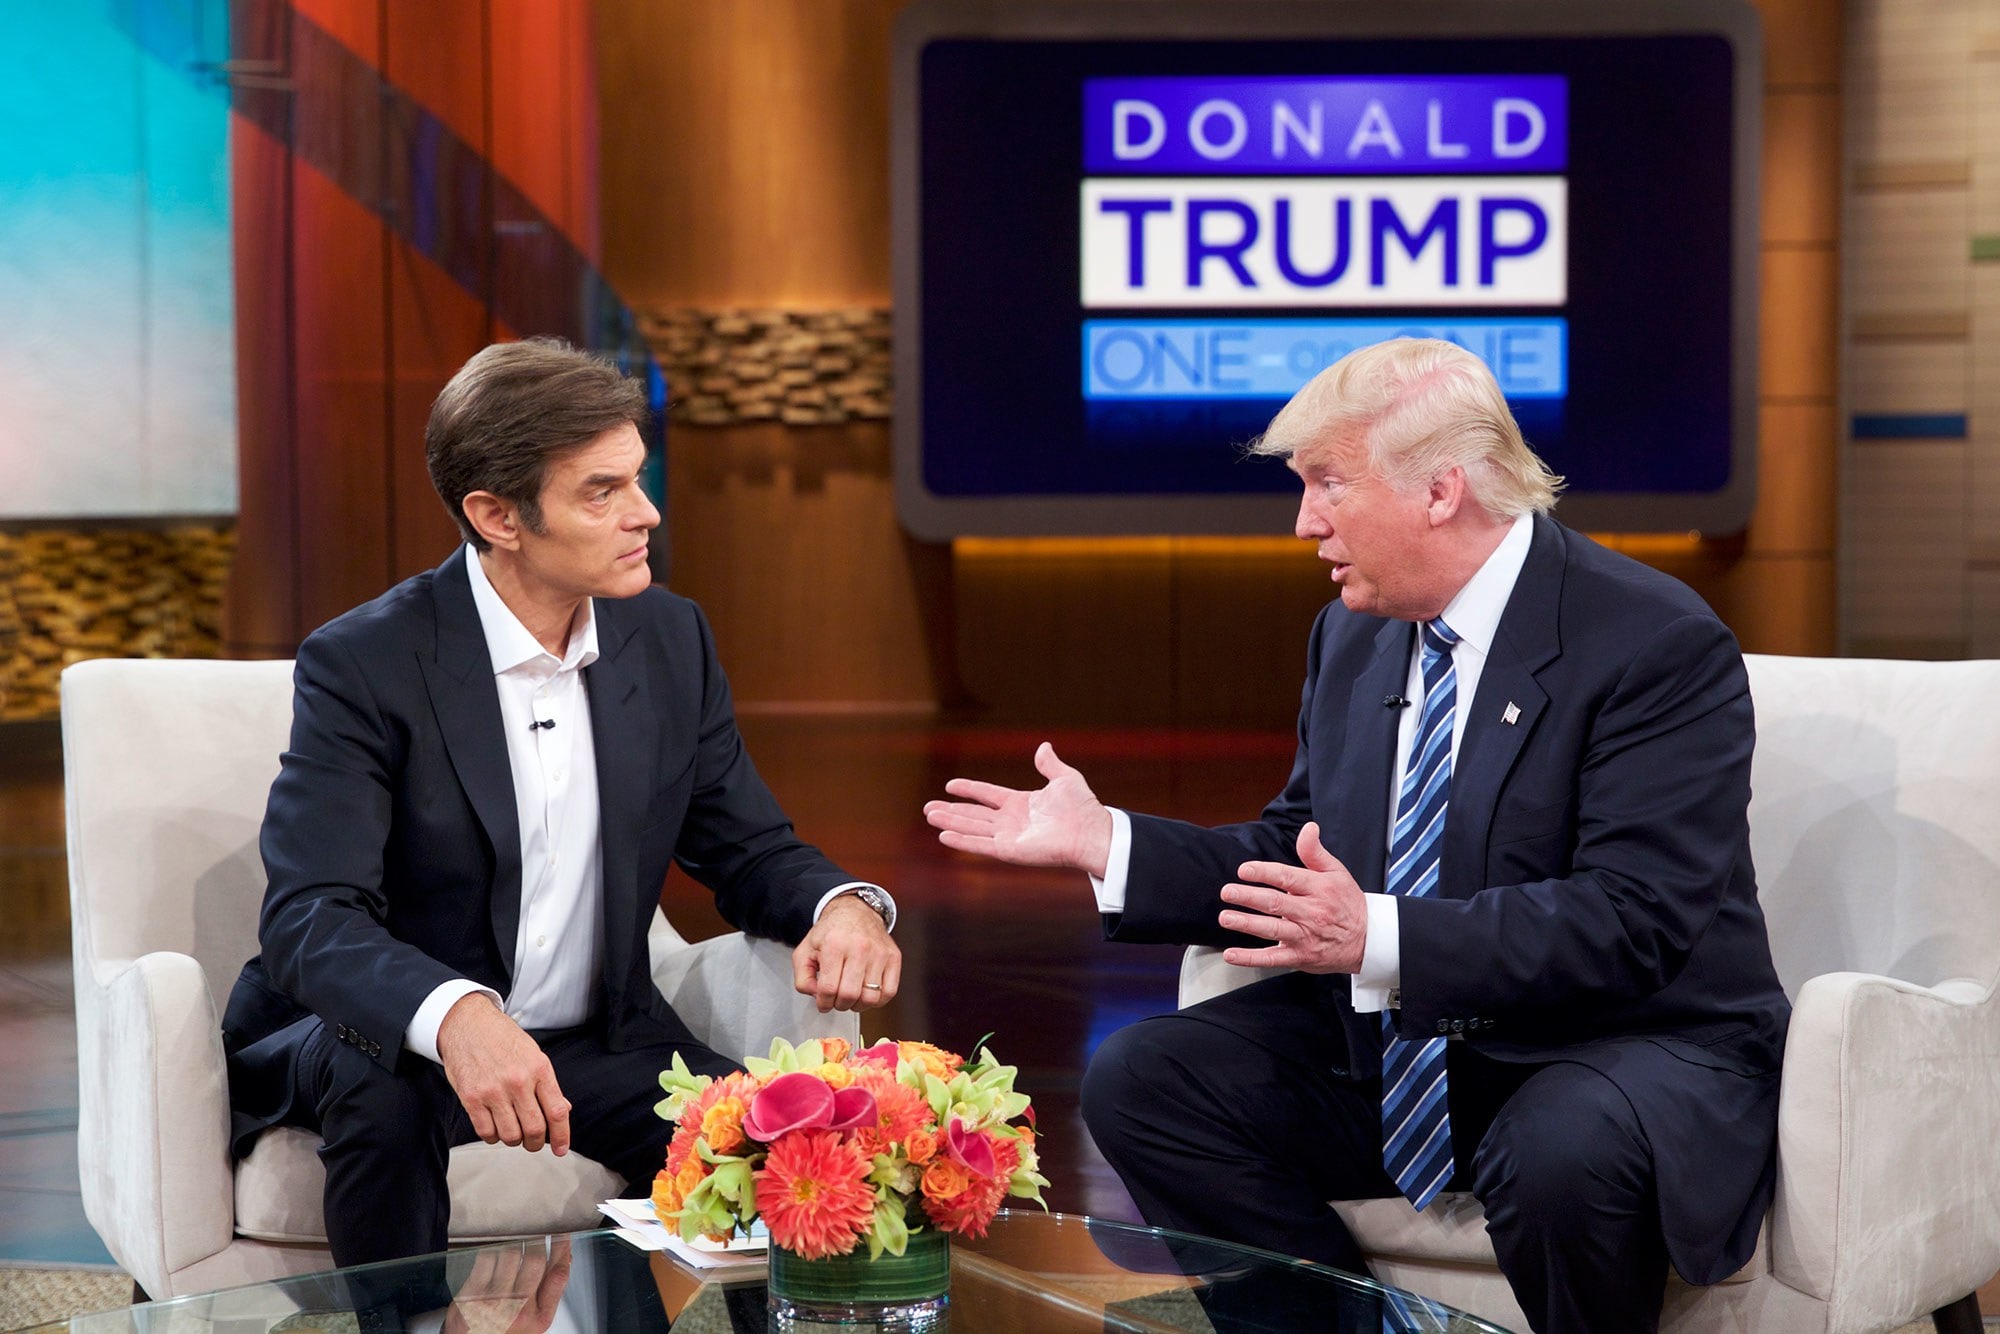 Trump appoints Dr. Oz to Council on Fitness, Sports and Nutrition. This isn't funny anymore